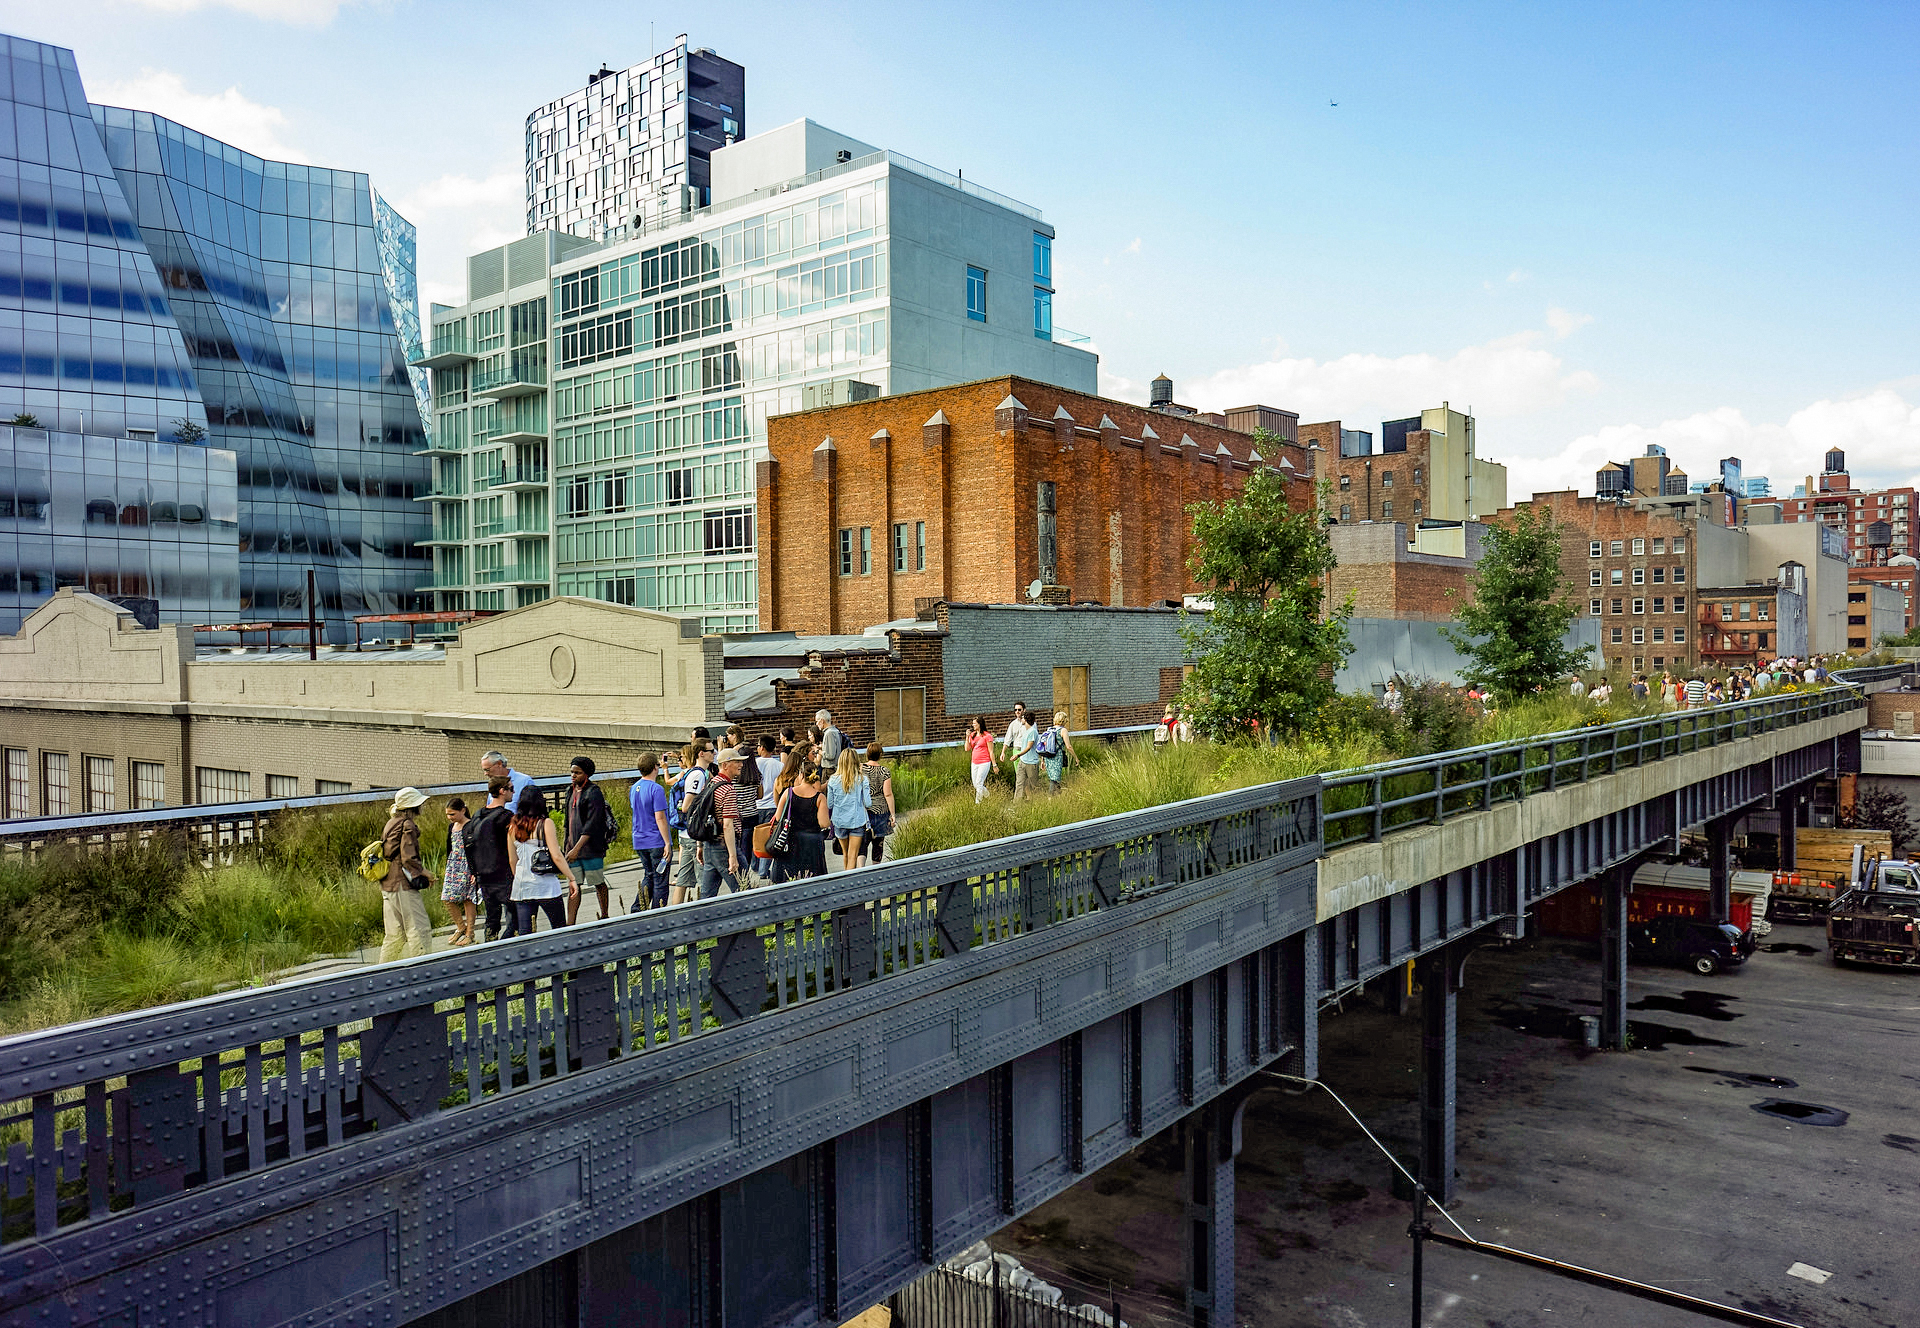 The  High Line, NYC. Photo By Dansnguyen - Own work, CC0,  https://commons.wikimedia.org/w/index.php?curid=89088130